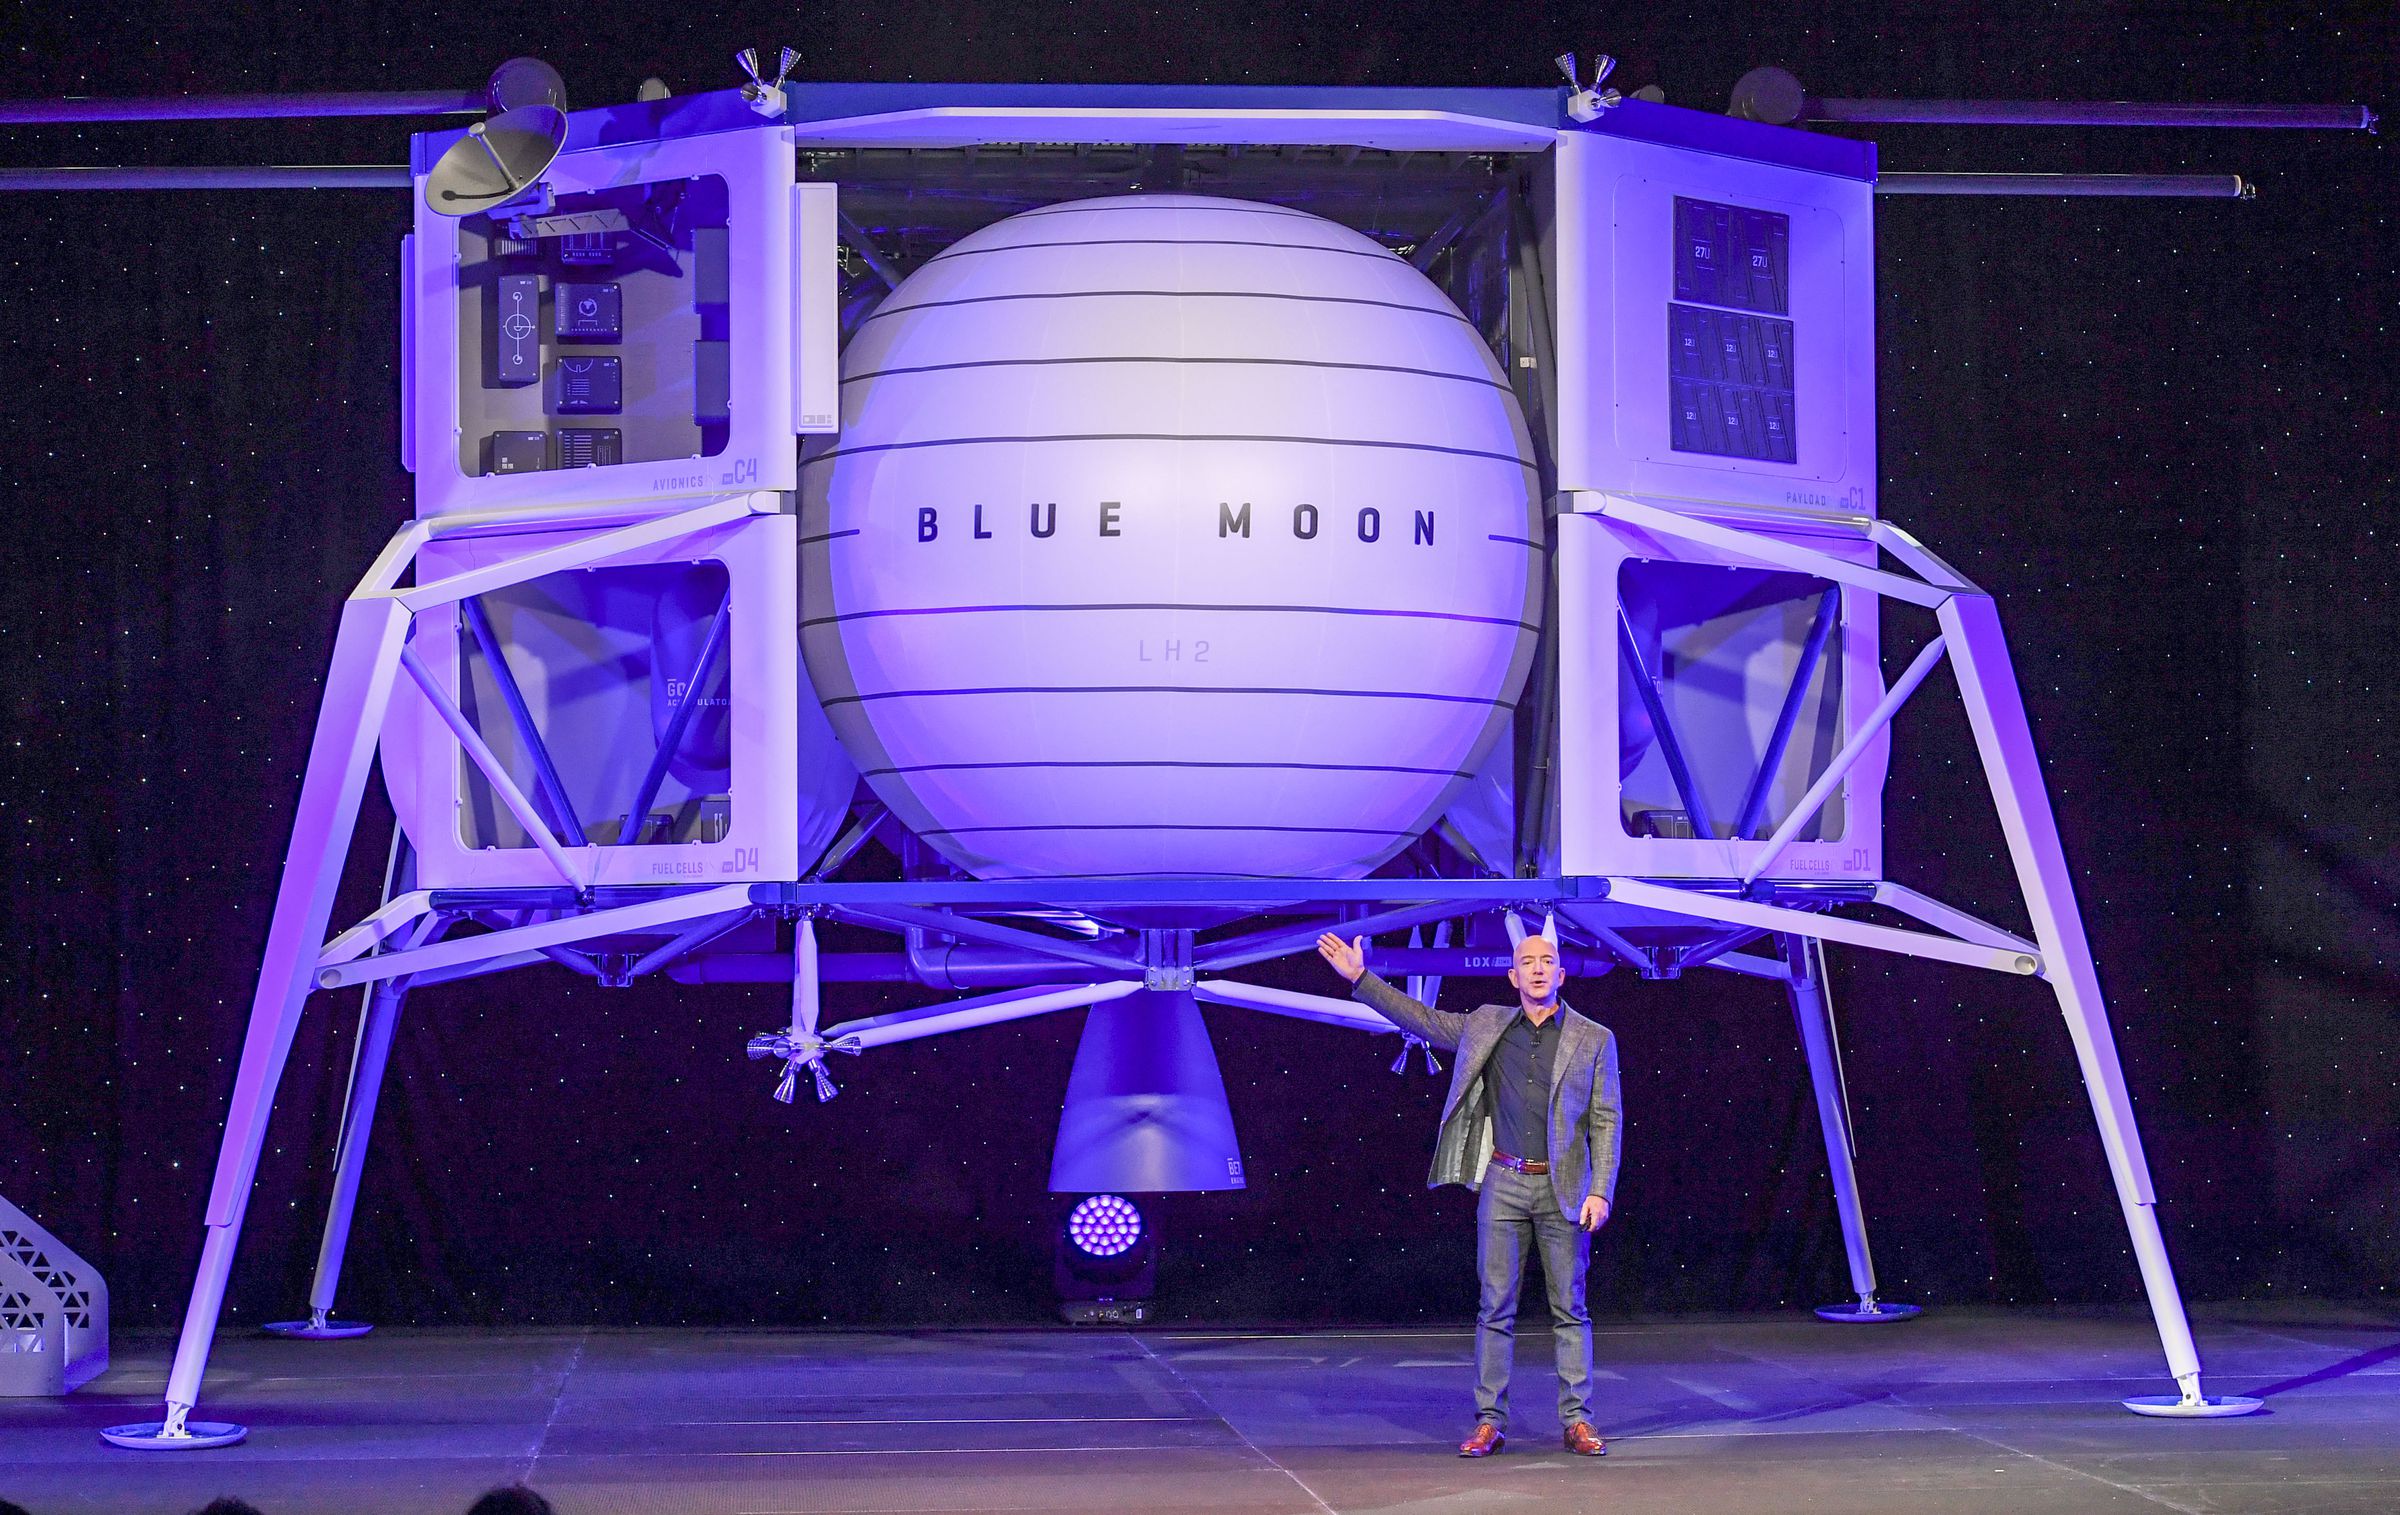 Blue Origin founder Jeff Bezos gives an update on their progress and share their vision of going to space to benefit Earth.